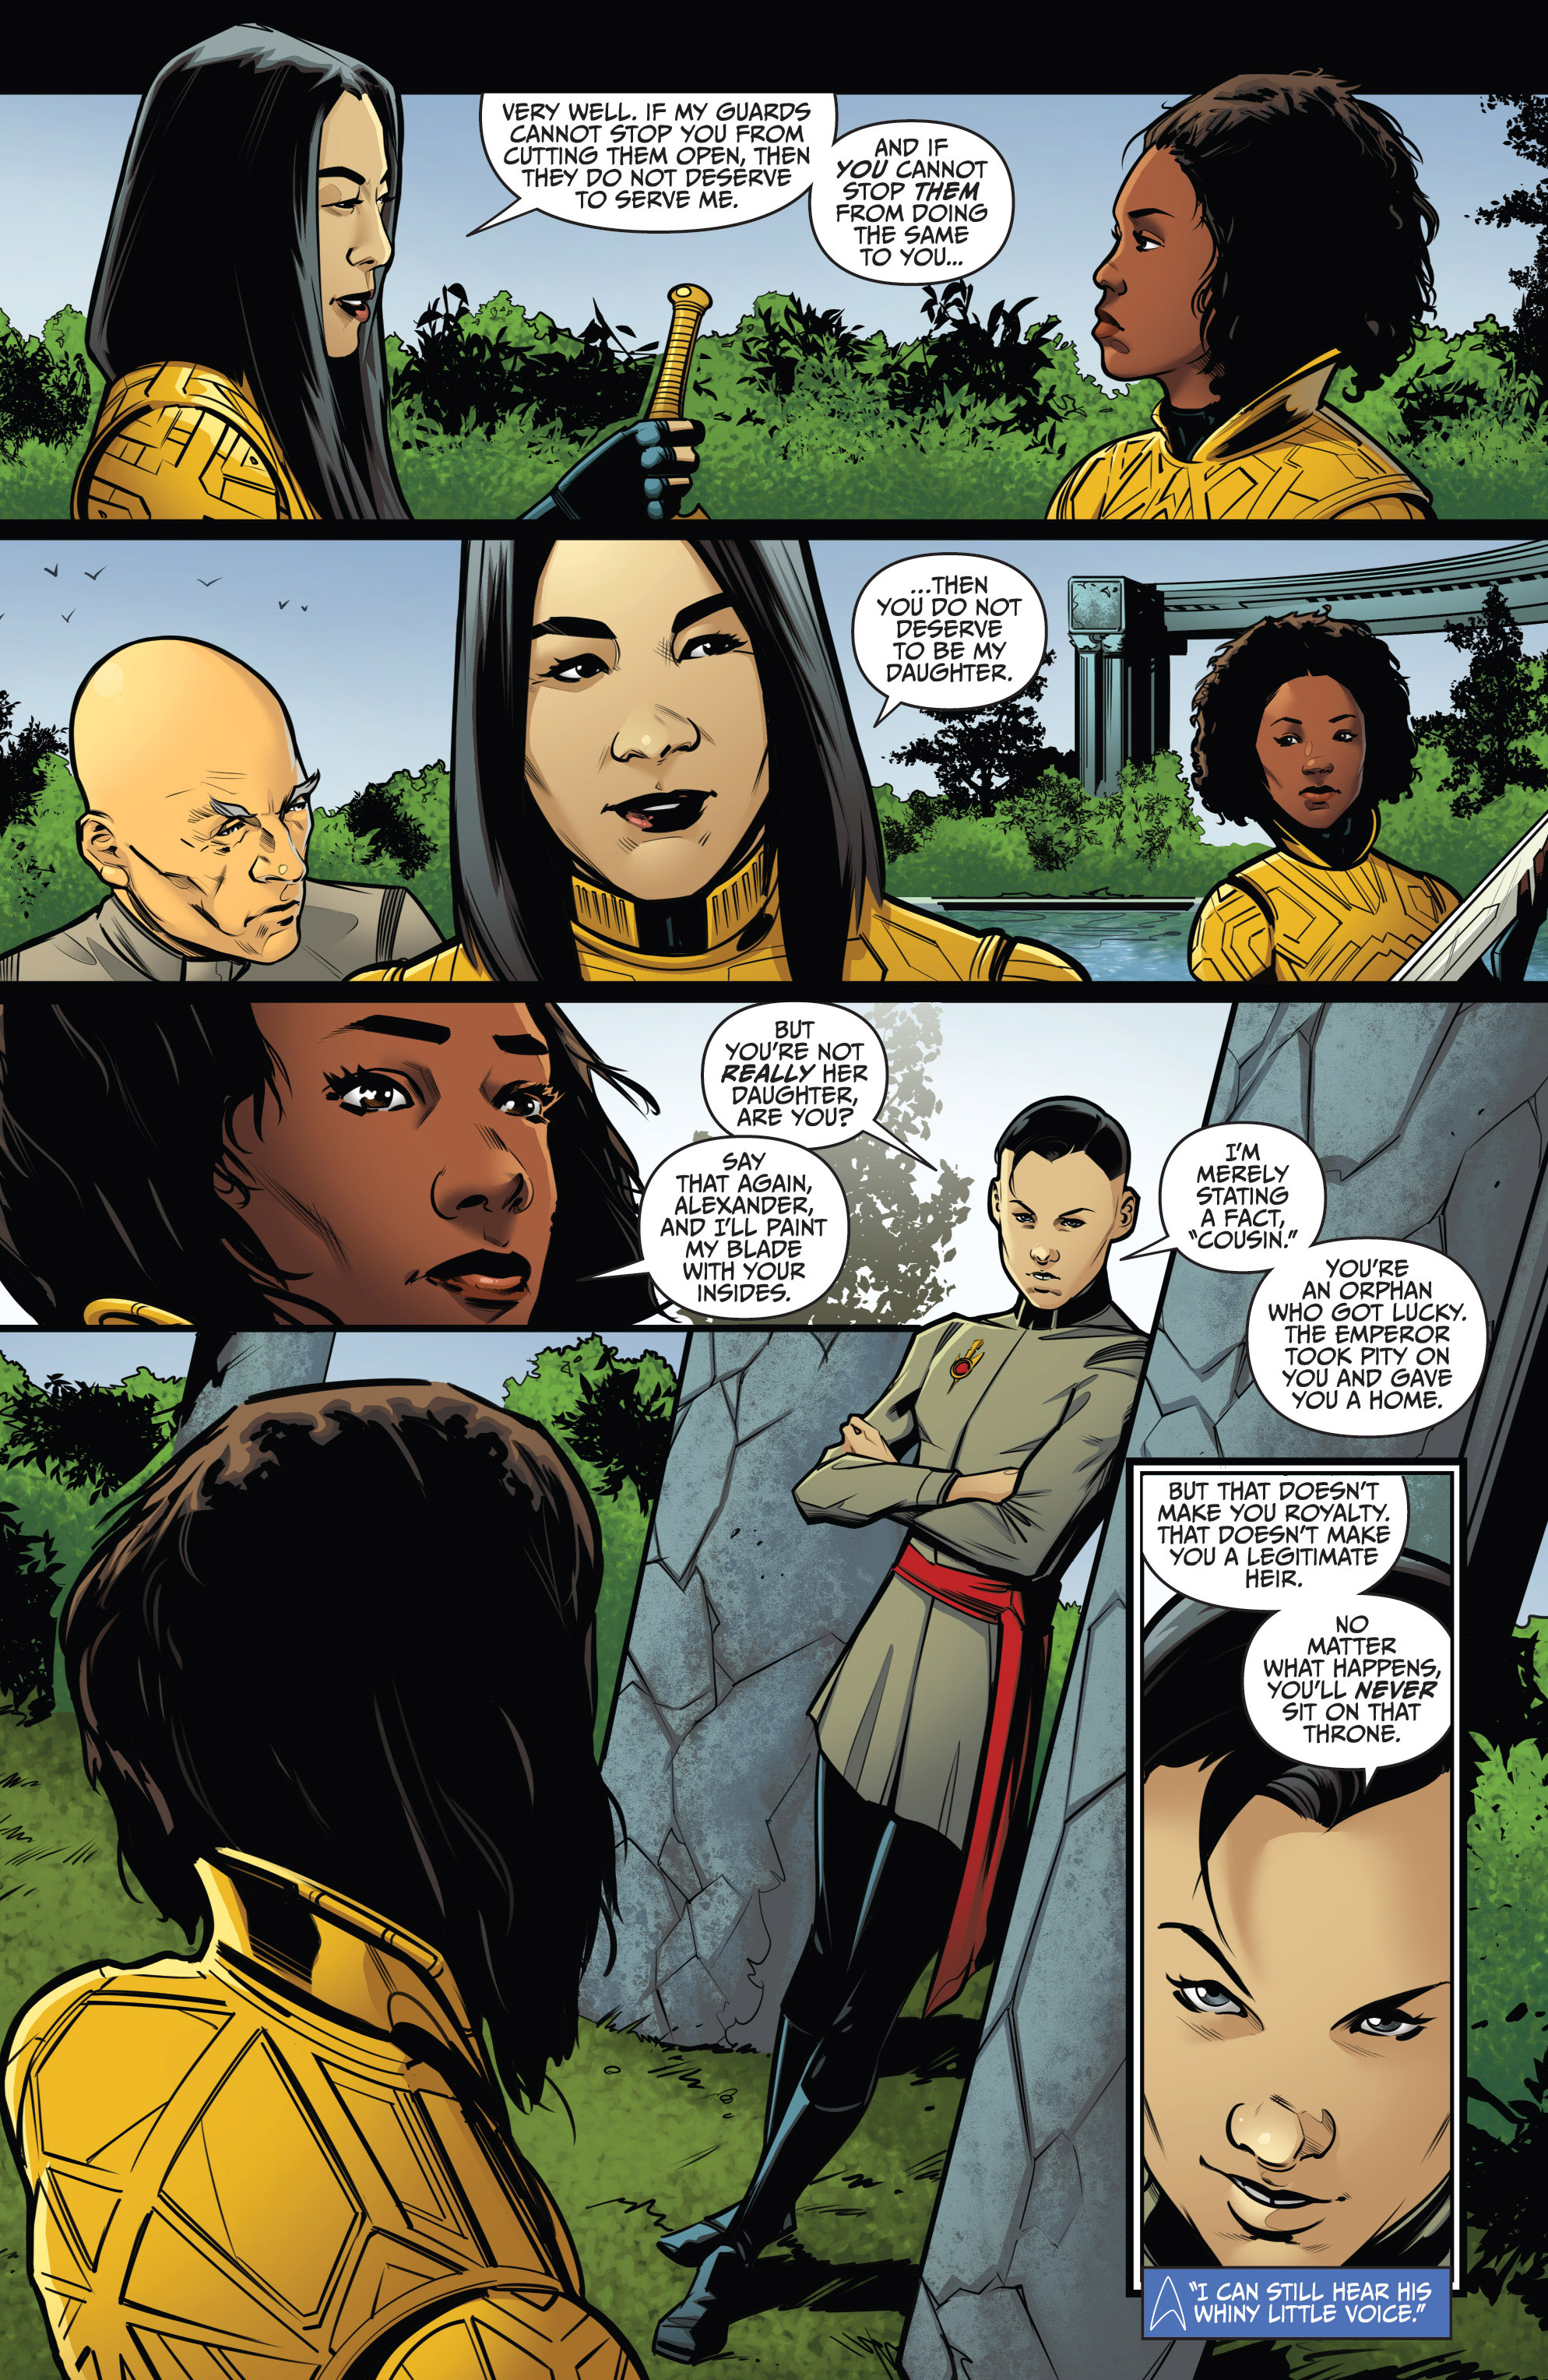 Star Trek: Discovery: Succession (2018-): Chapter 2 - Page 5